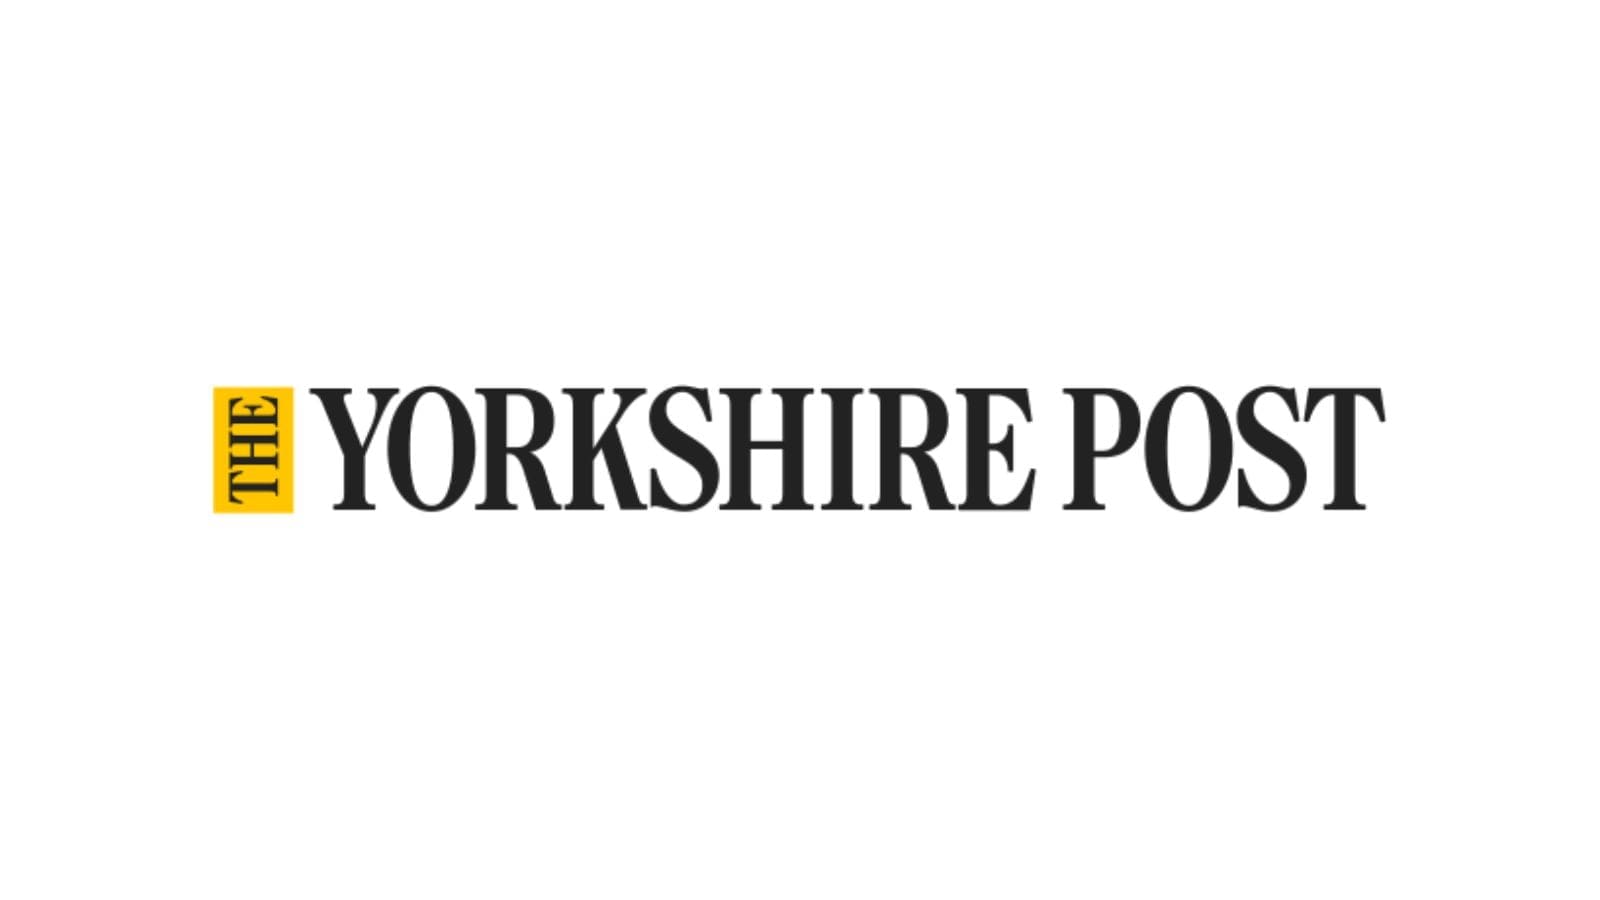 A sideways word "THE" in a yellow box. Next to this is the words "YORKSHIRE POST" in black.